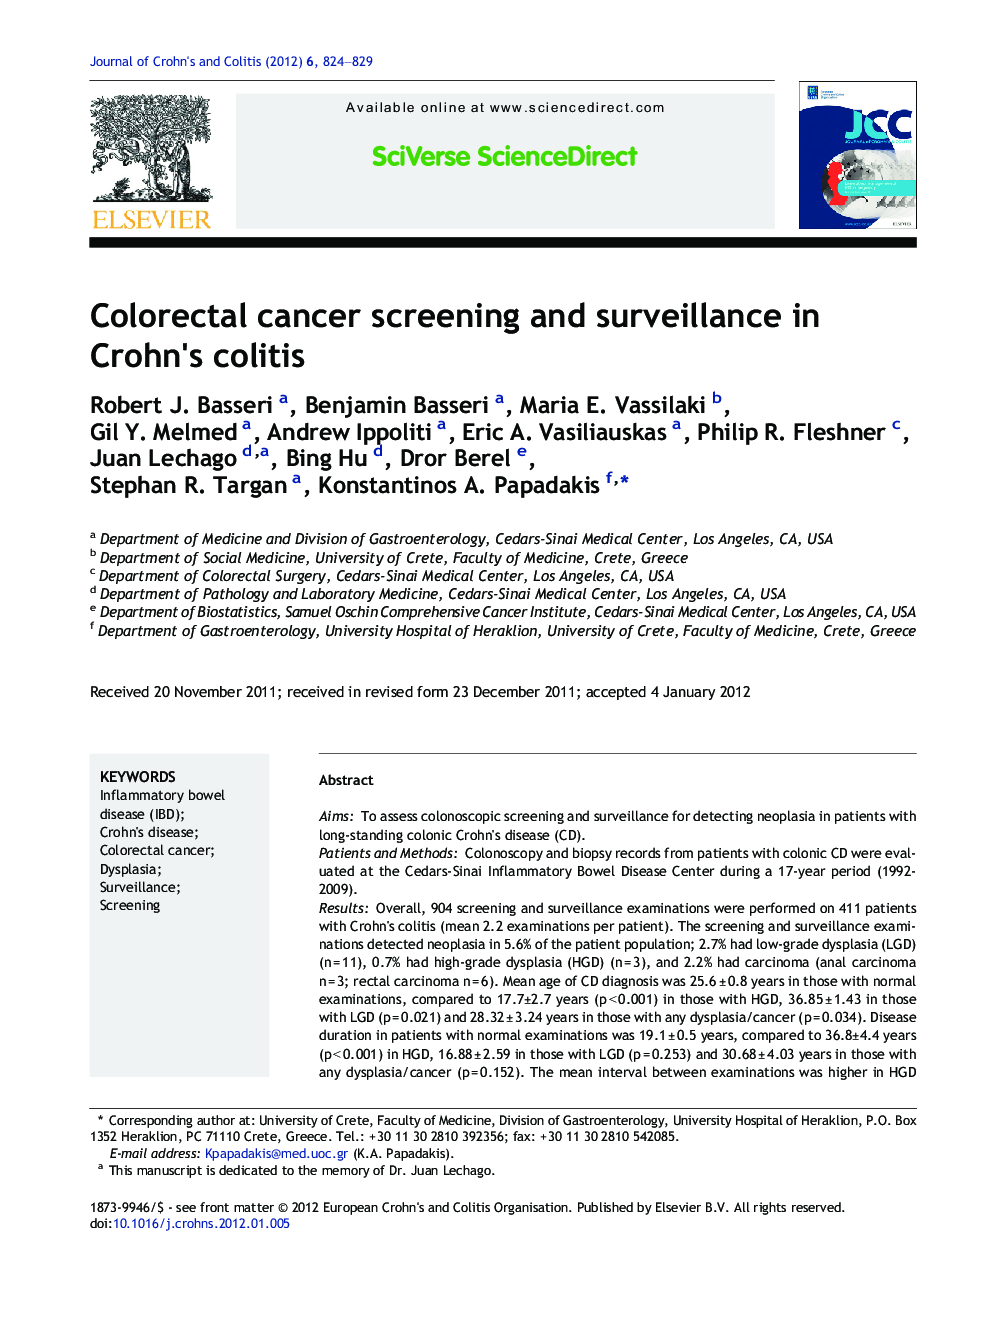 Colorectal cancer screening and surveillance in Crohn's colitis